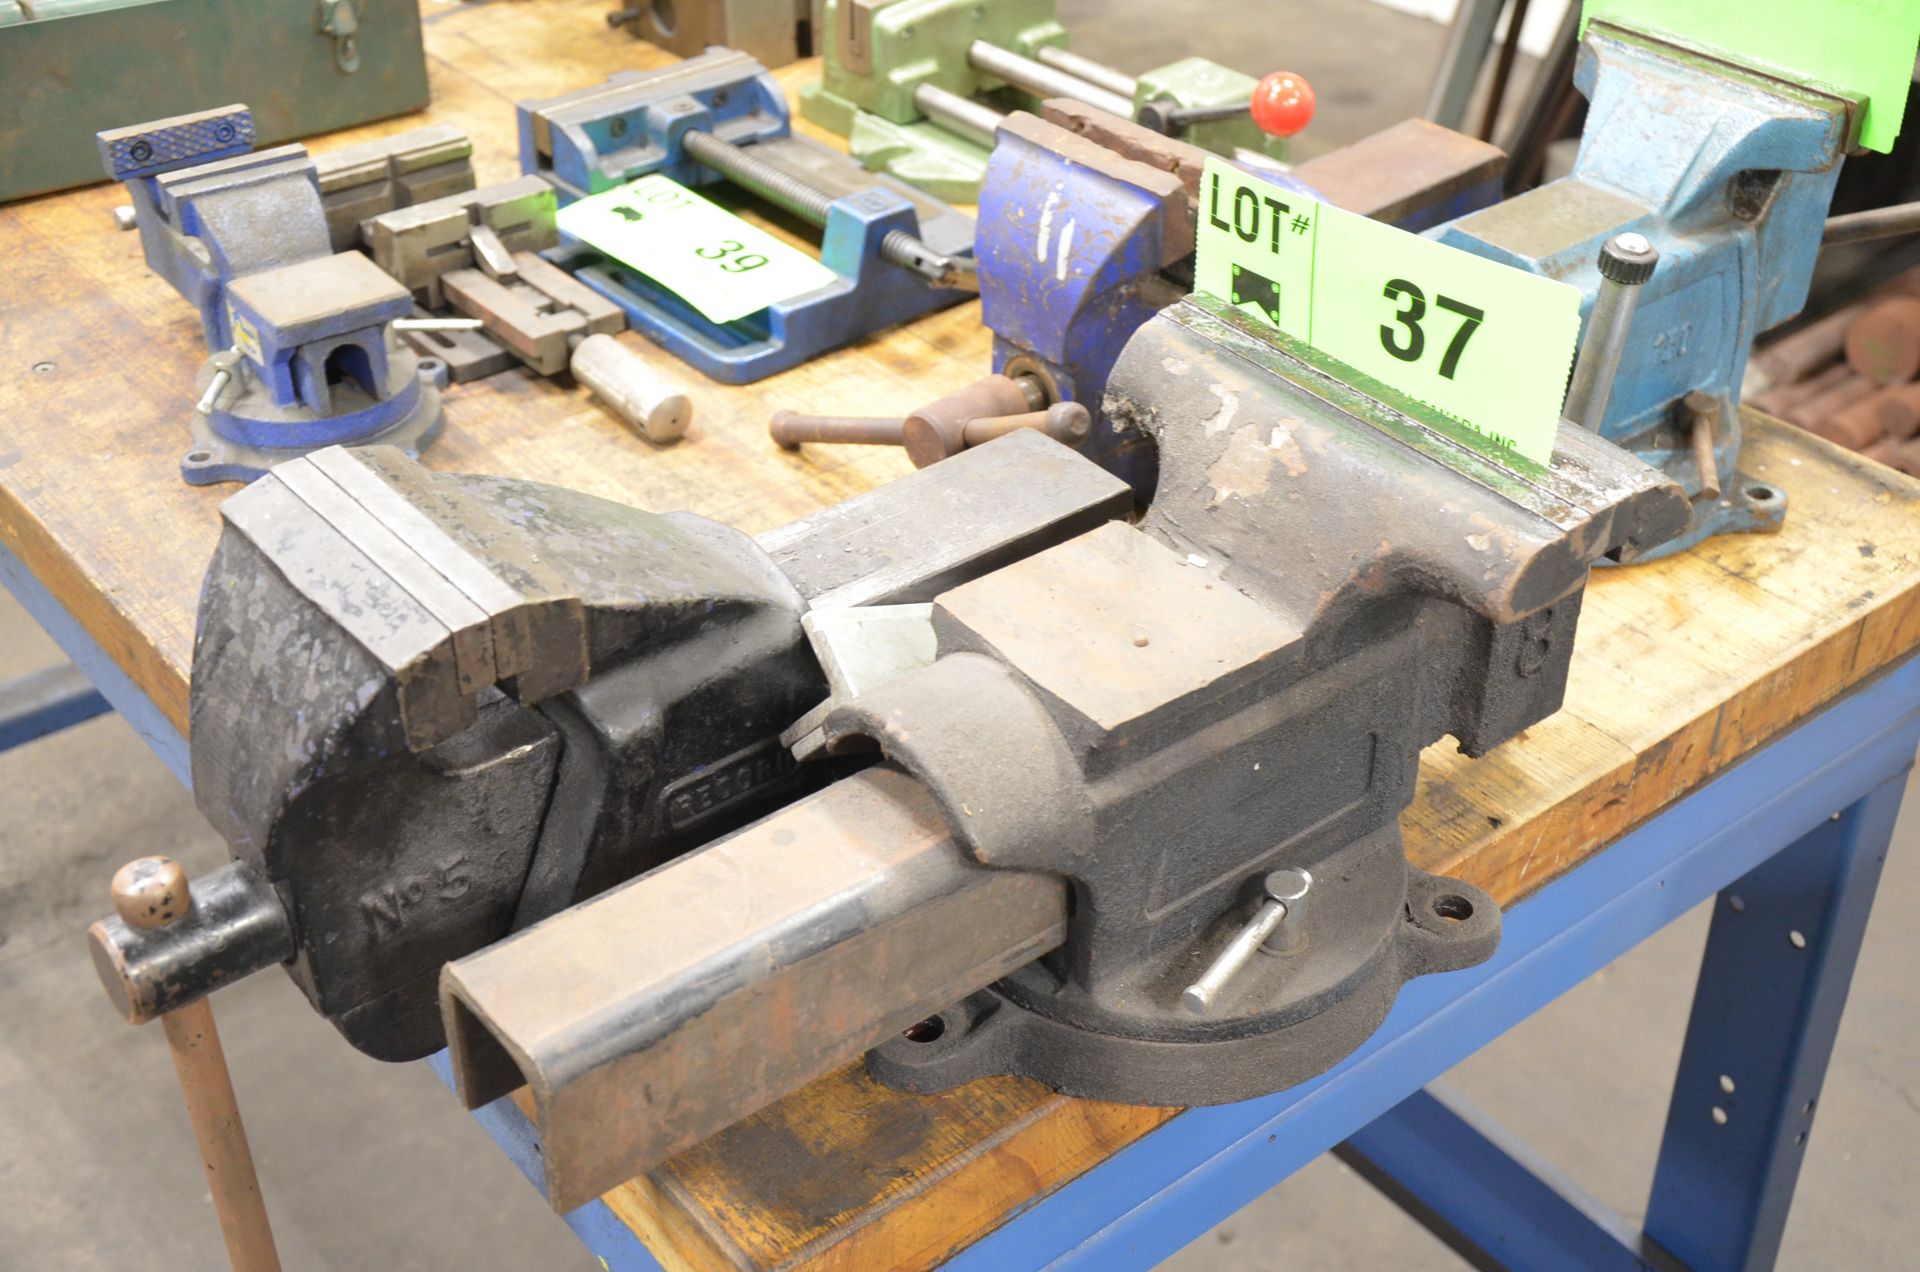 LOT/ 8" SWIVEL BASE VISE AND 5" BENCH VISE [RIGGING FEE FOR LOT #37 - $20 USD PLUS APPLICABLE